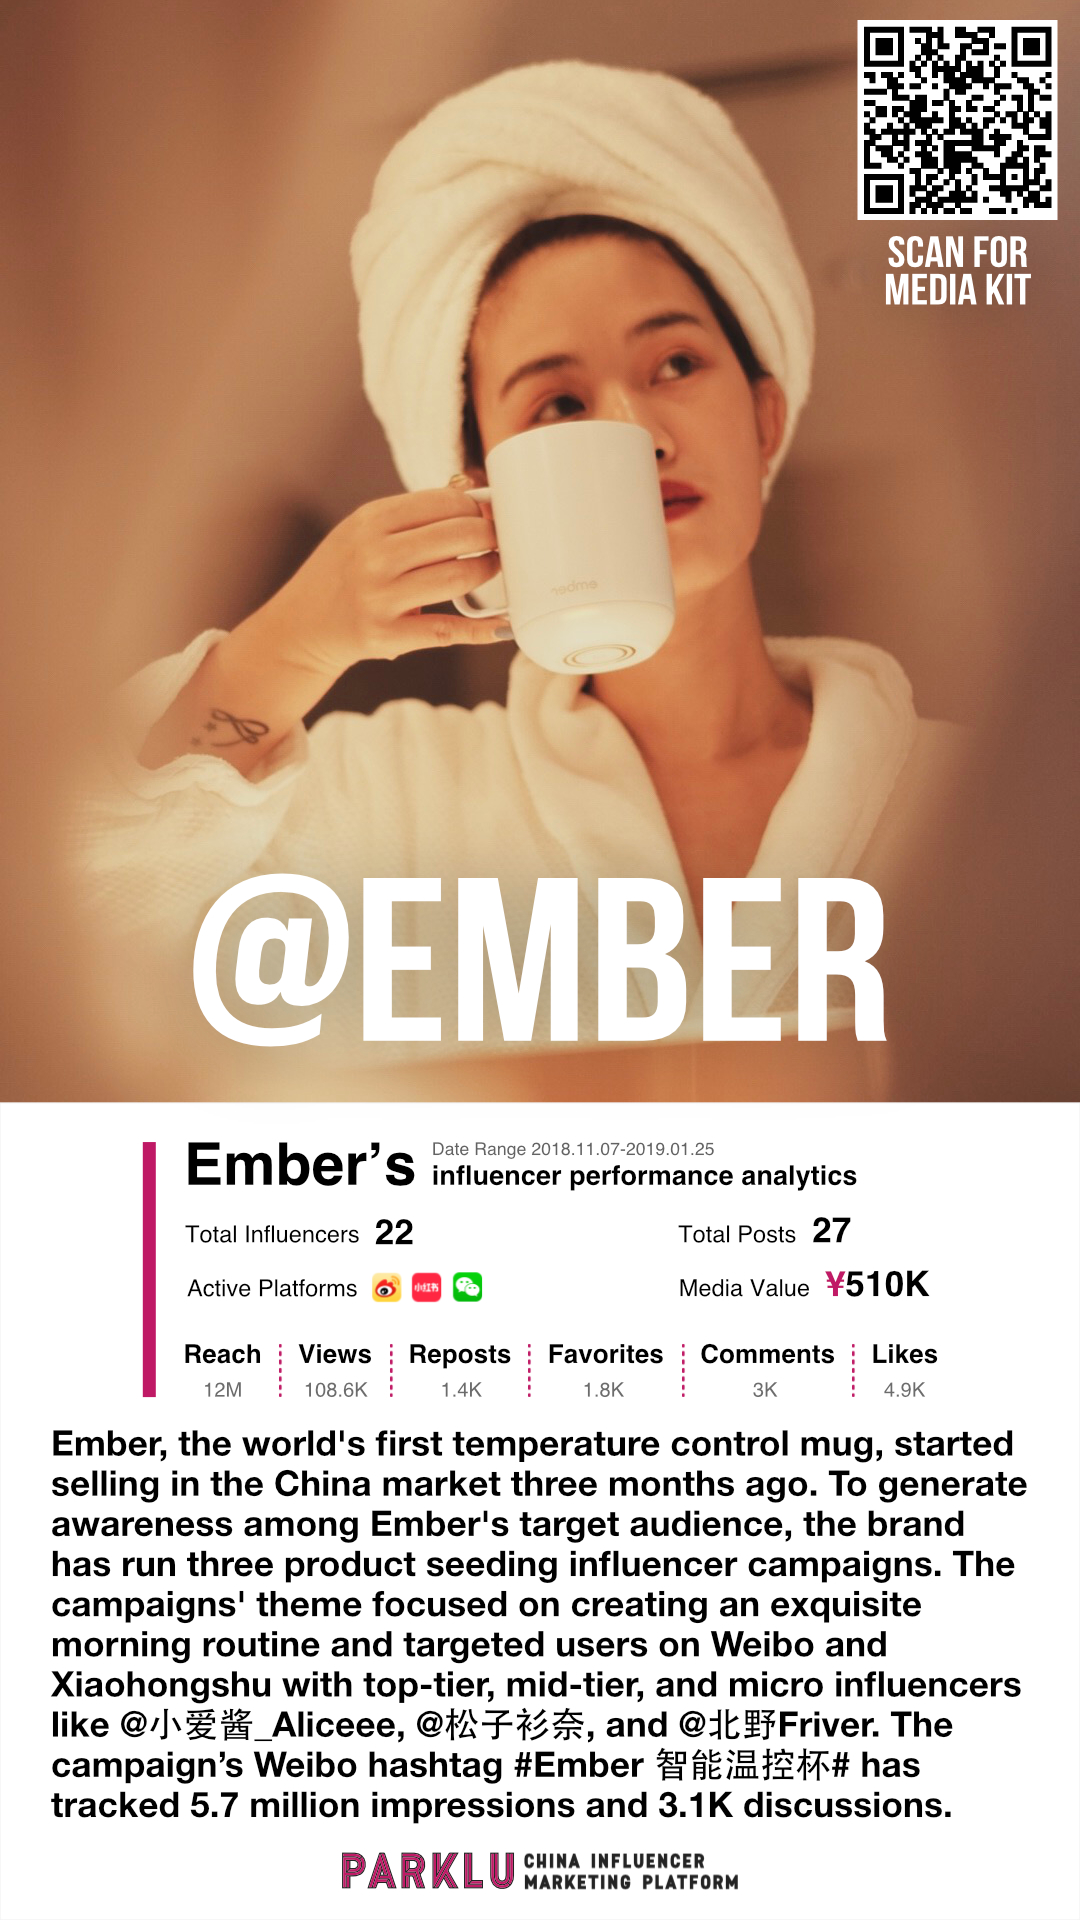 Ember Uses Influencers as Key Entry Strategy